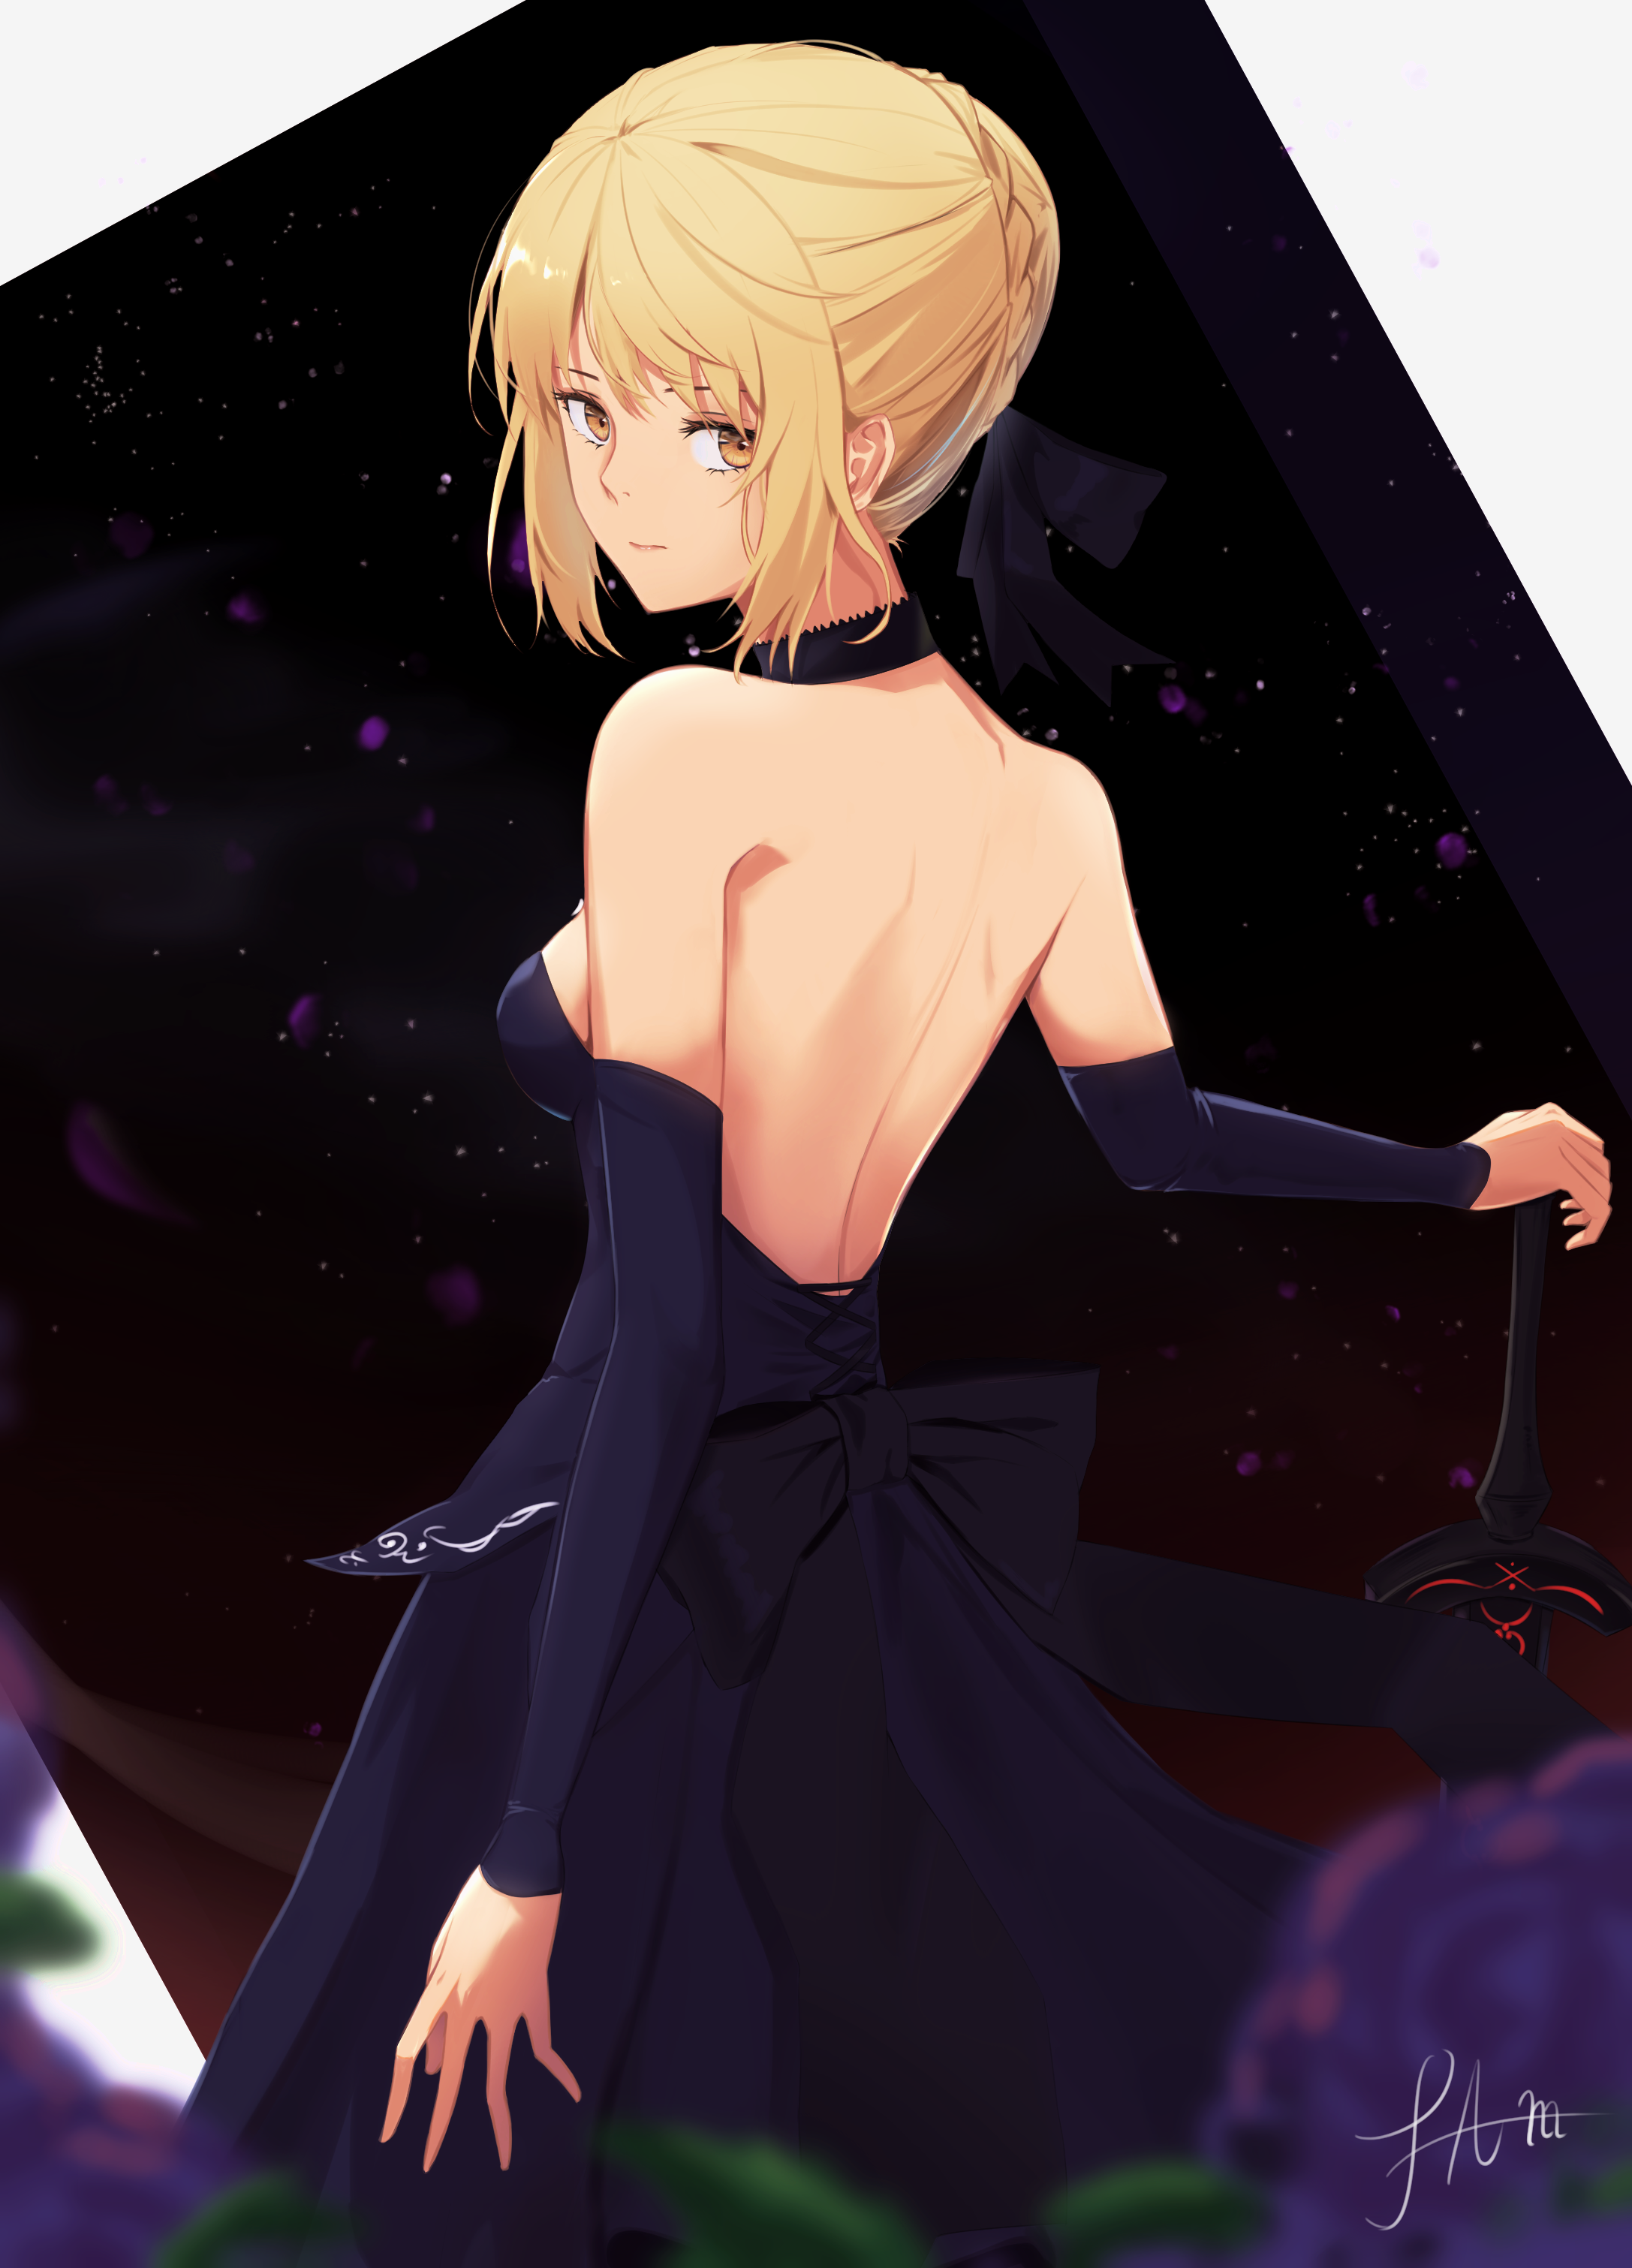 Fate Series Fate Stay Night Heavens Feel Fate Stay Night Anime Girls Black Dress Fantasy Weapon Yell 2174x3021